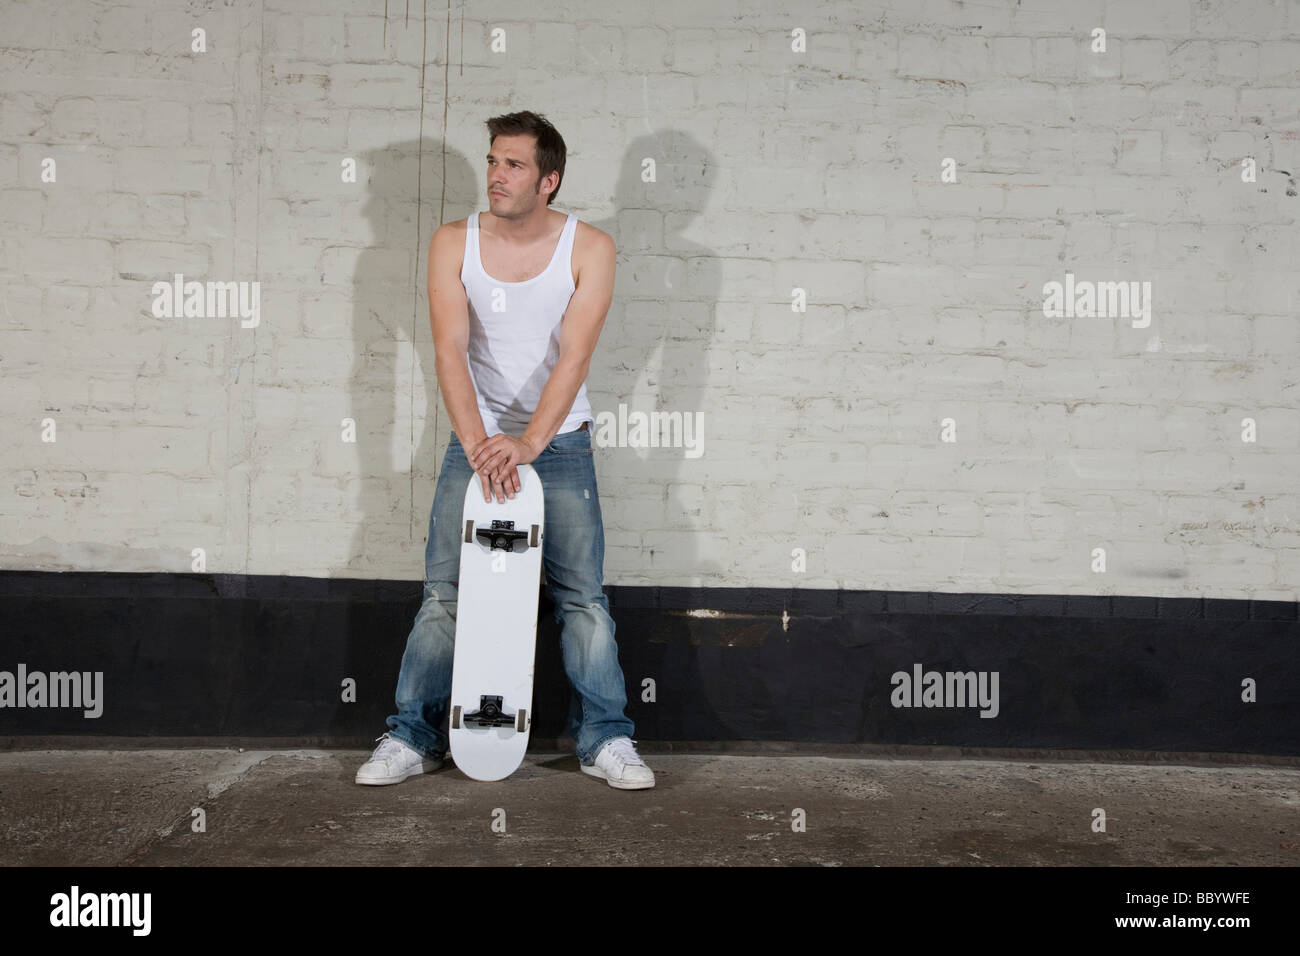 Skateboarder standing in front of a wall Stock Photo